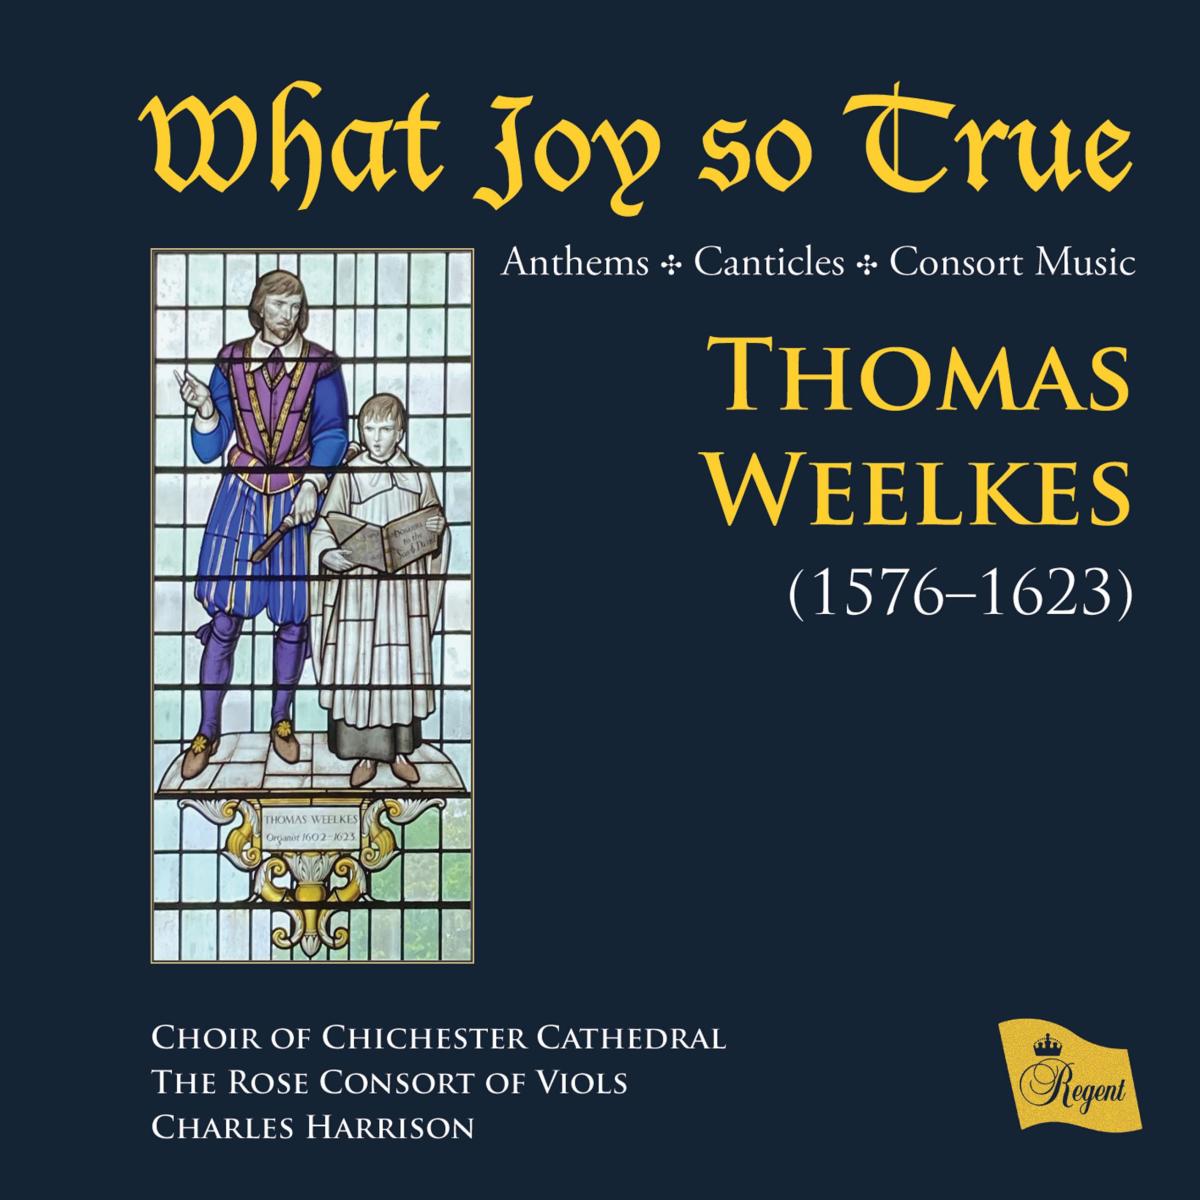 What Joy So True - anthems and motets by Thomas Weelkes - Rose Consort of Viols, choir of Chichester Cathedral